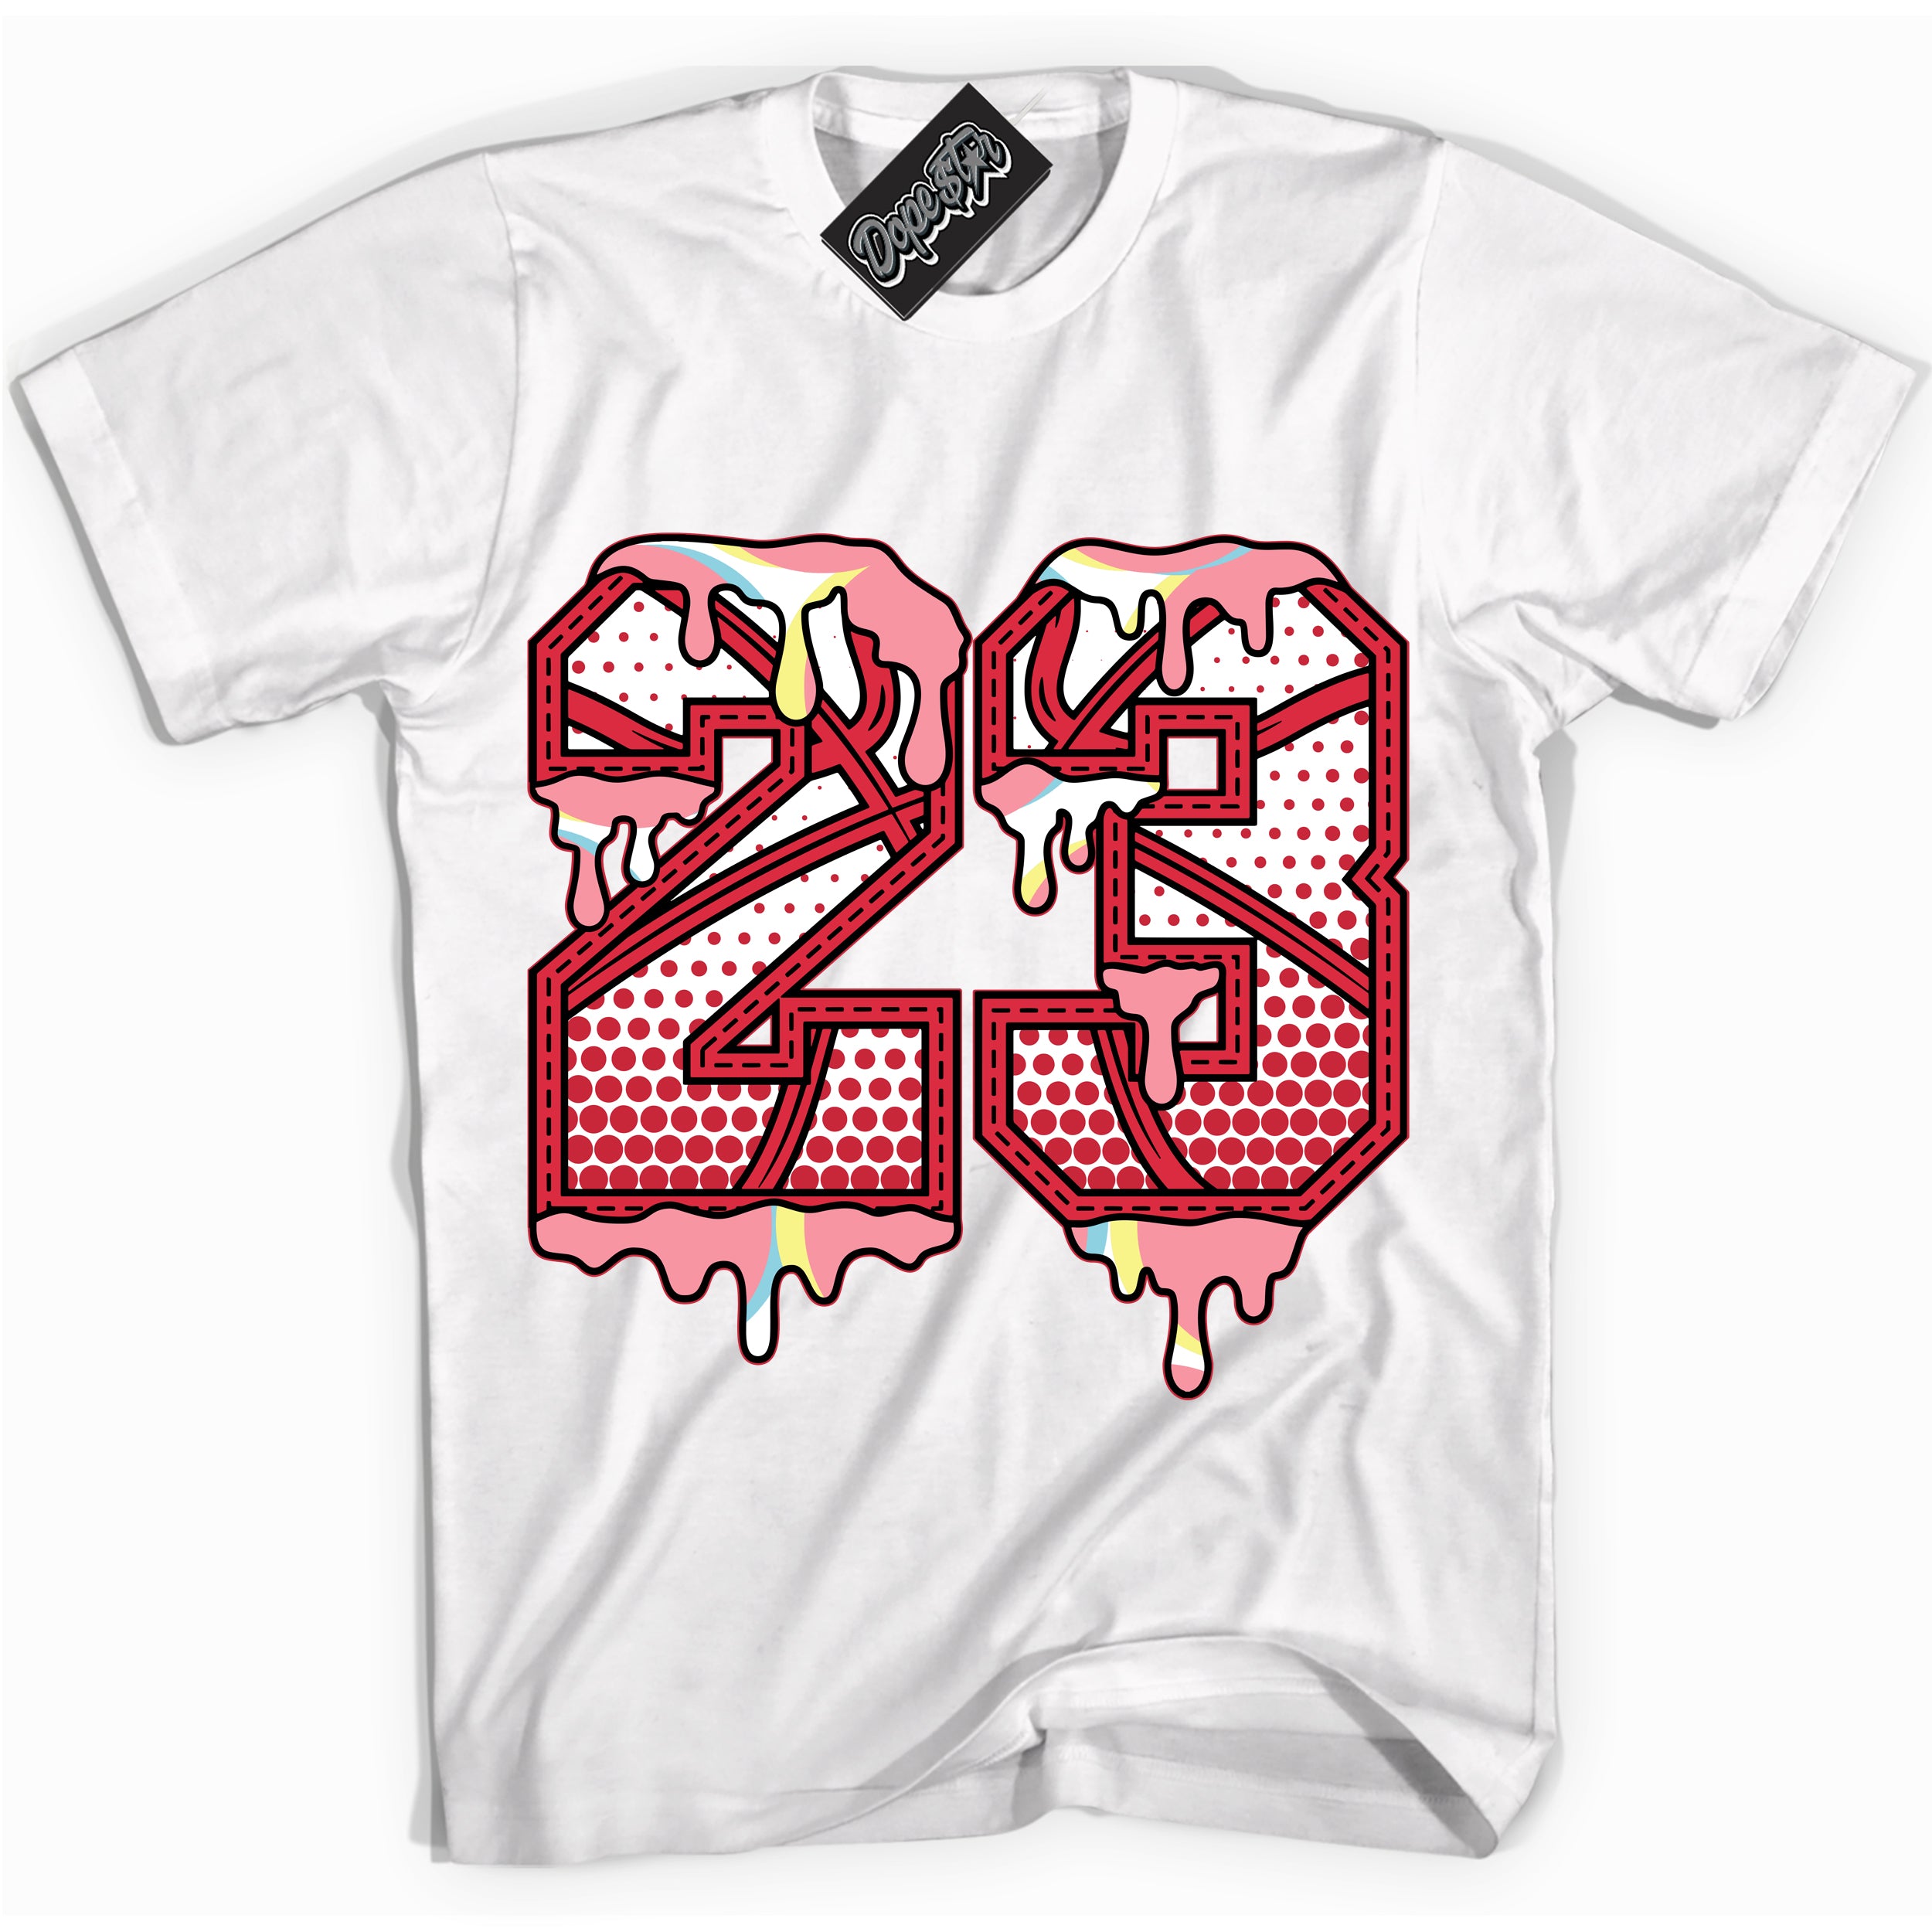 Cool White graphic tee with “ 23 Ball ” design, that perfectly matches Spider-Verse 1s sneakers 